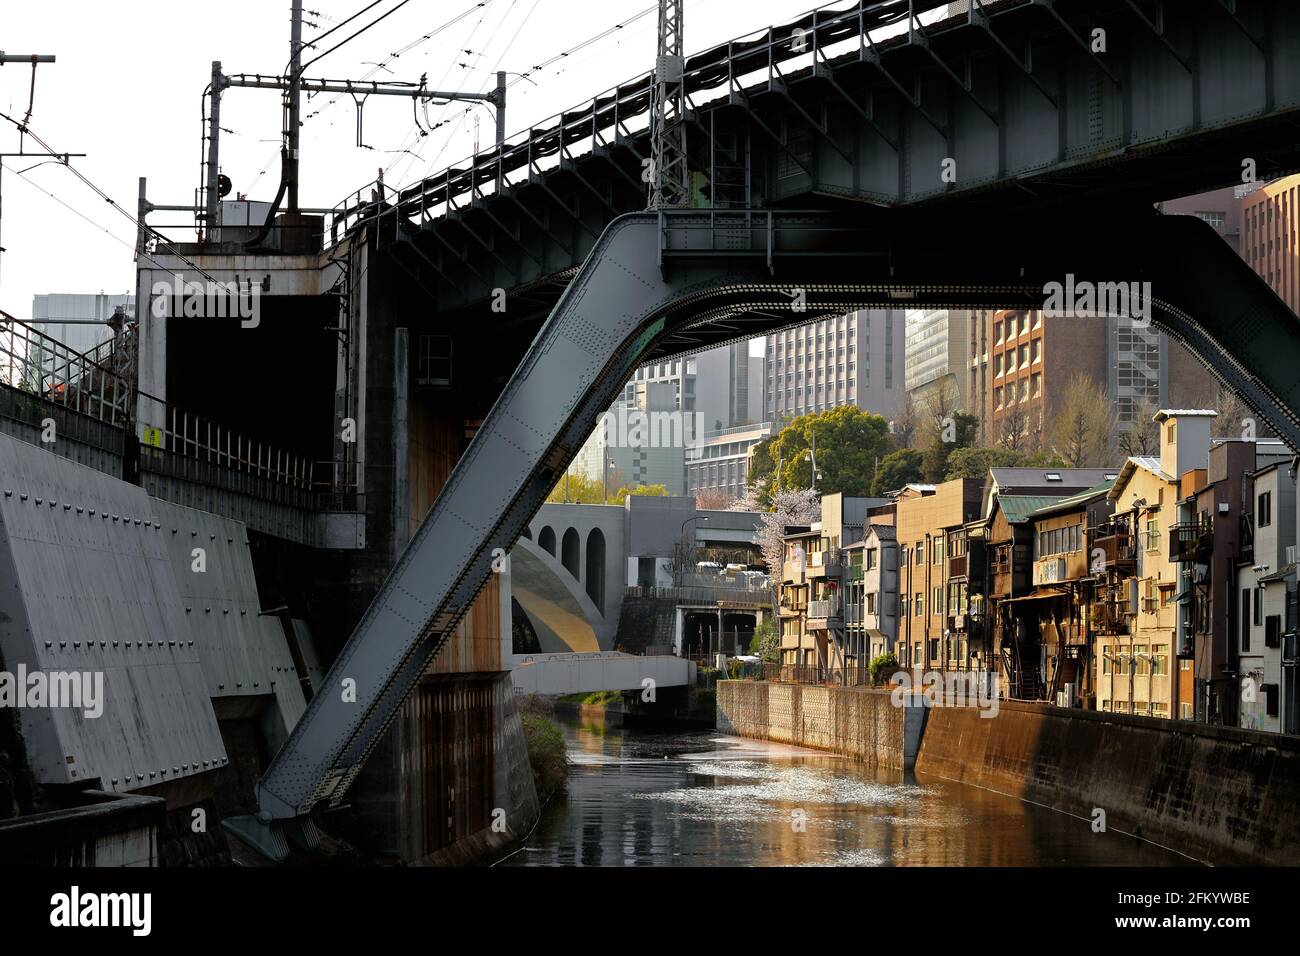 Scenery of the Kanda River flowing through the town near Ochanomizu, where the old streets of Japan remain Stock Photo